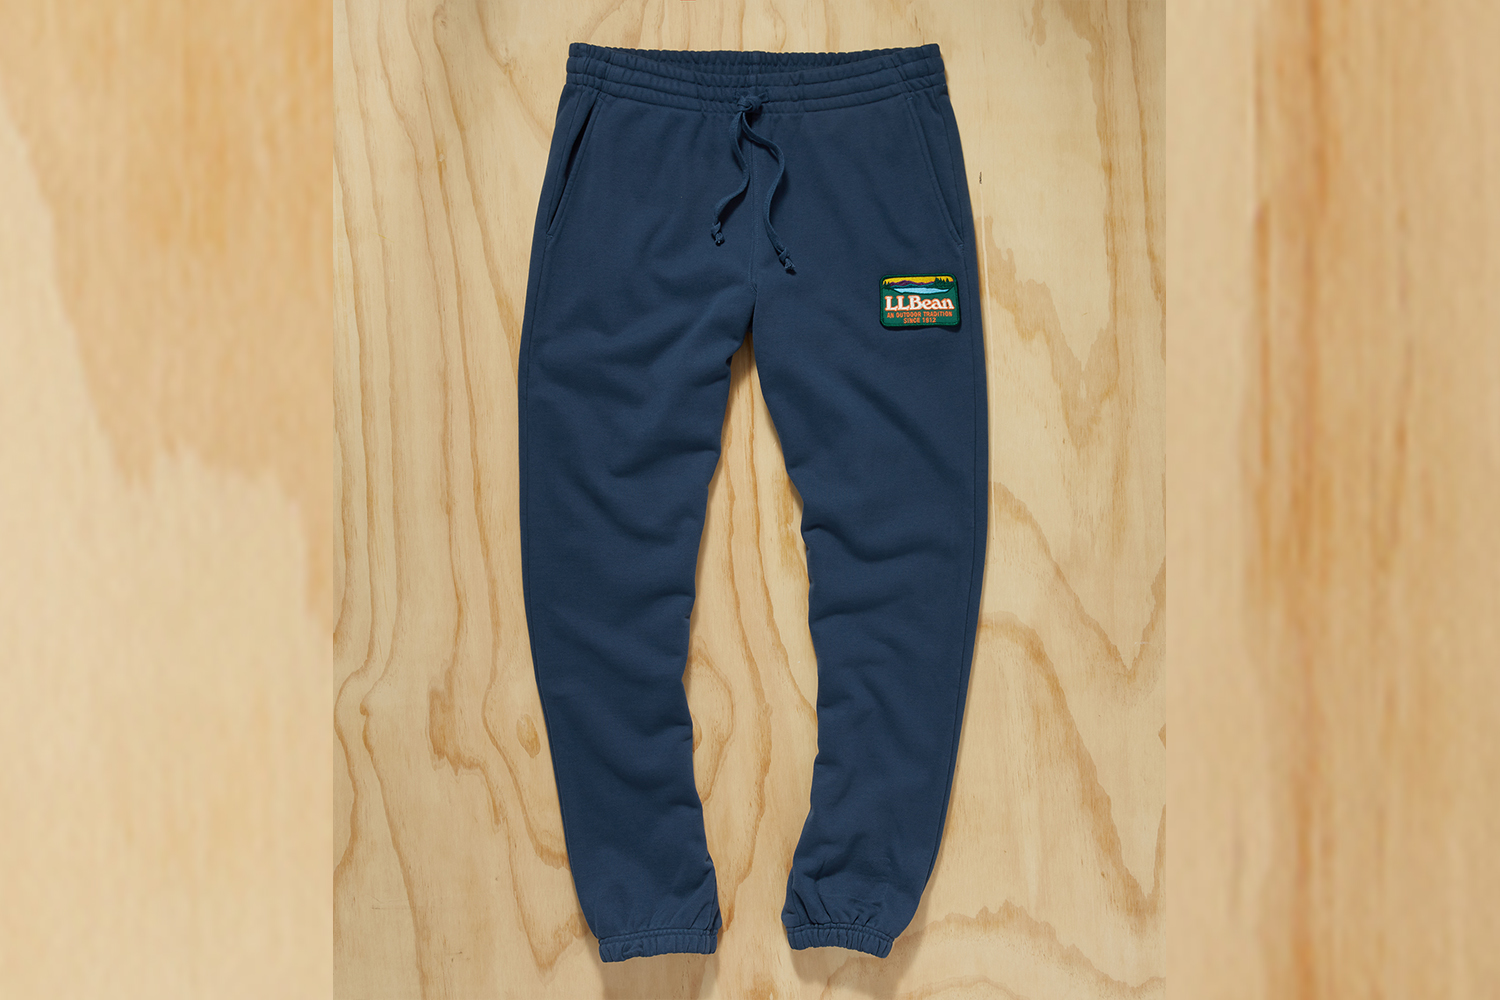 a pair of blue sweatpants on a wood background